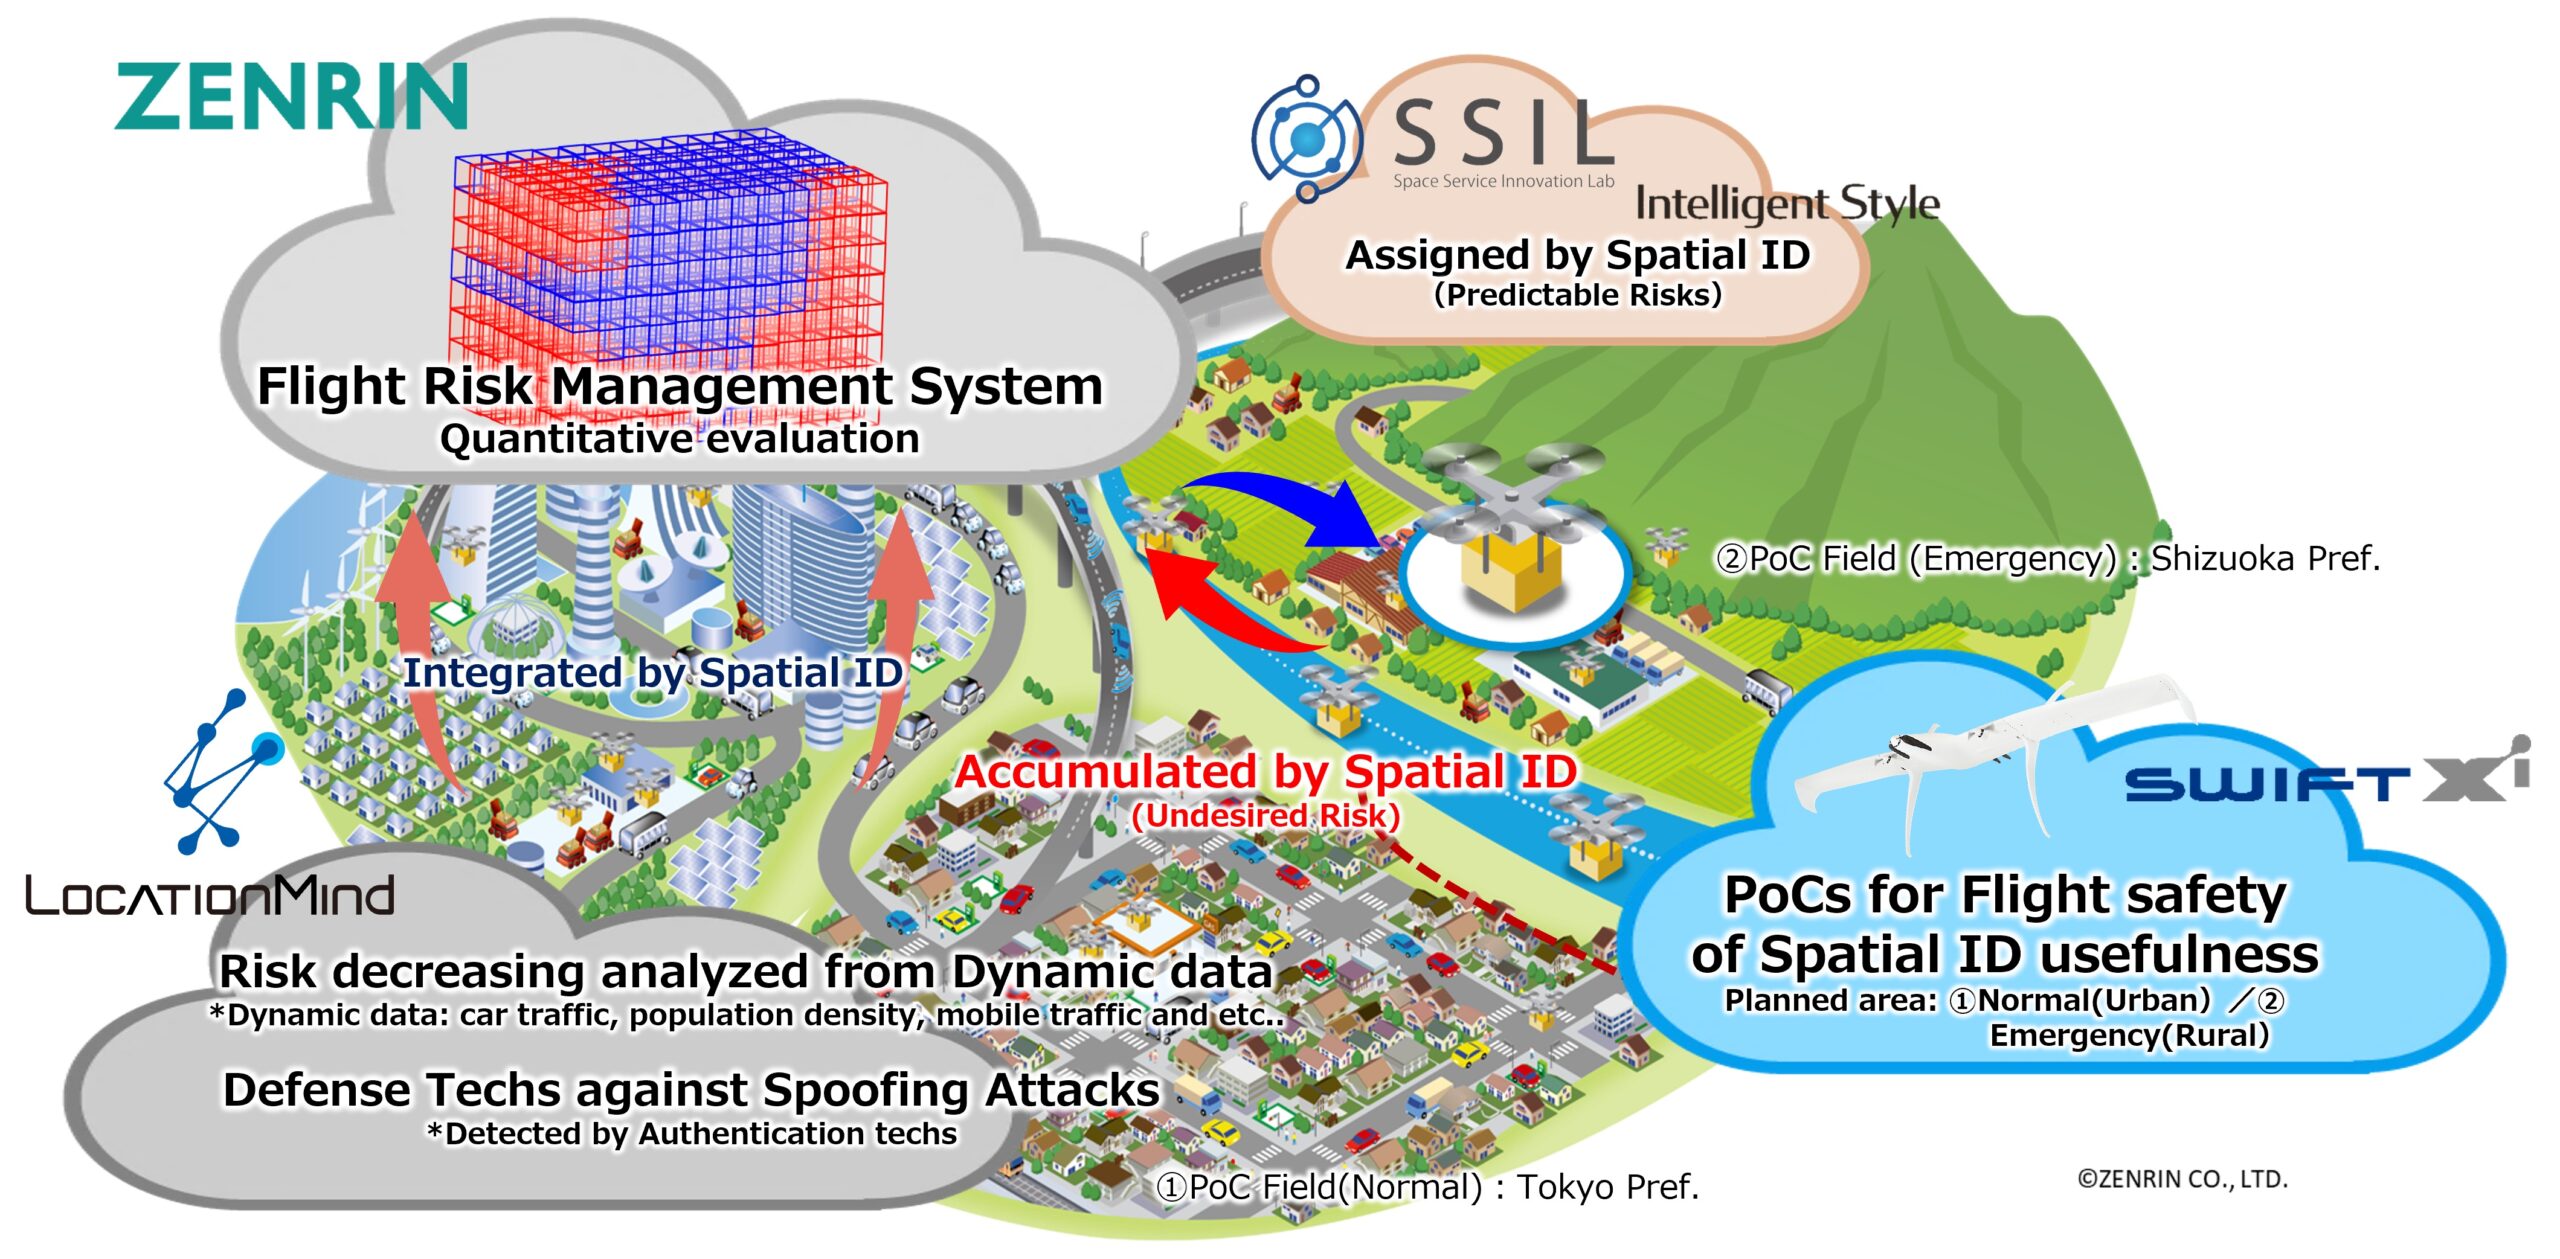 Three-dimensional spatial information infrastructure